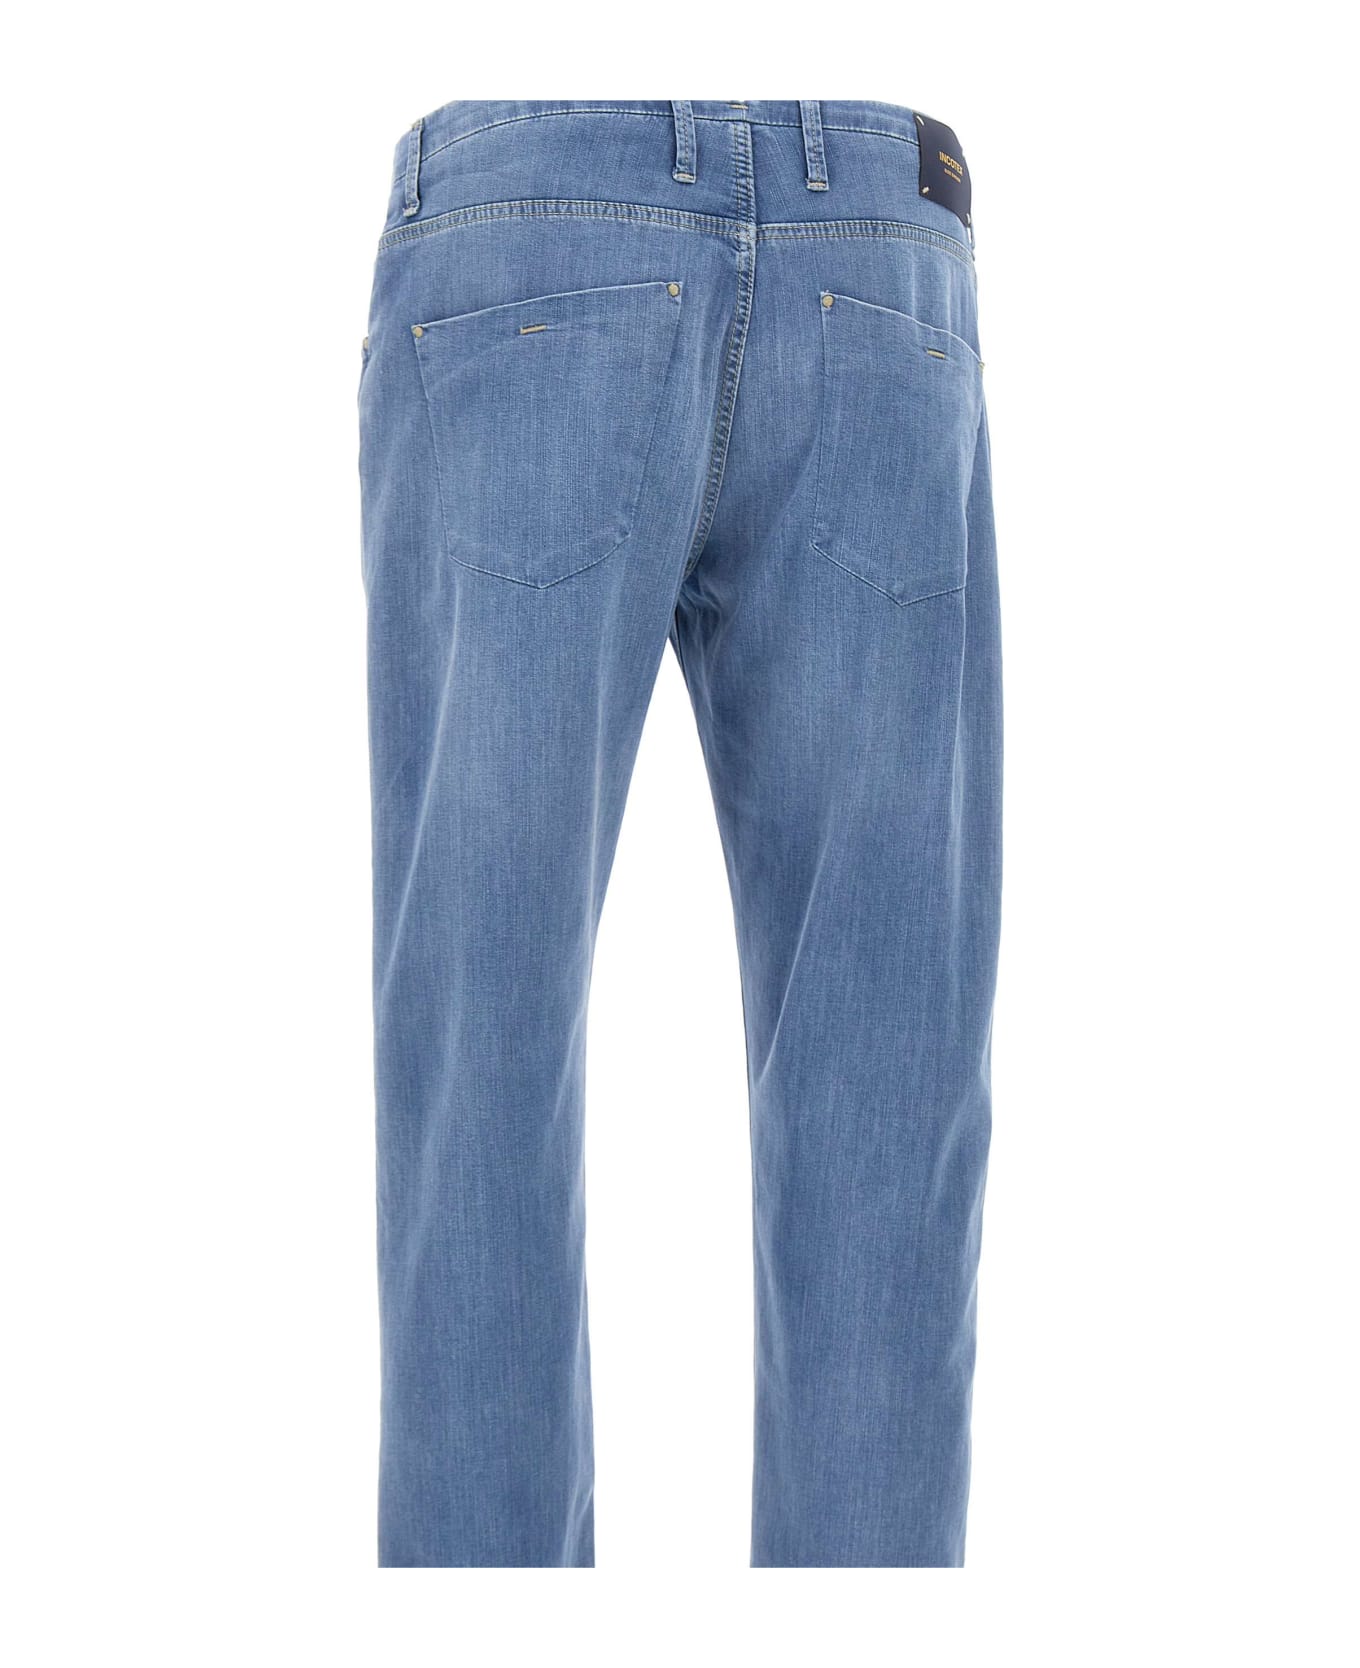 Incotex "blue Division Tailor Made" Jeans - BLUE